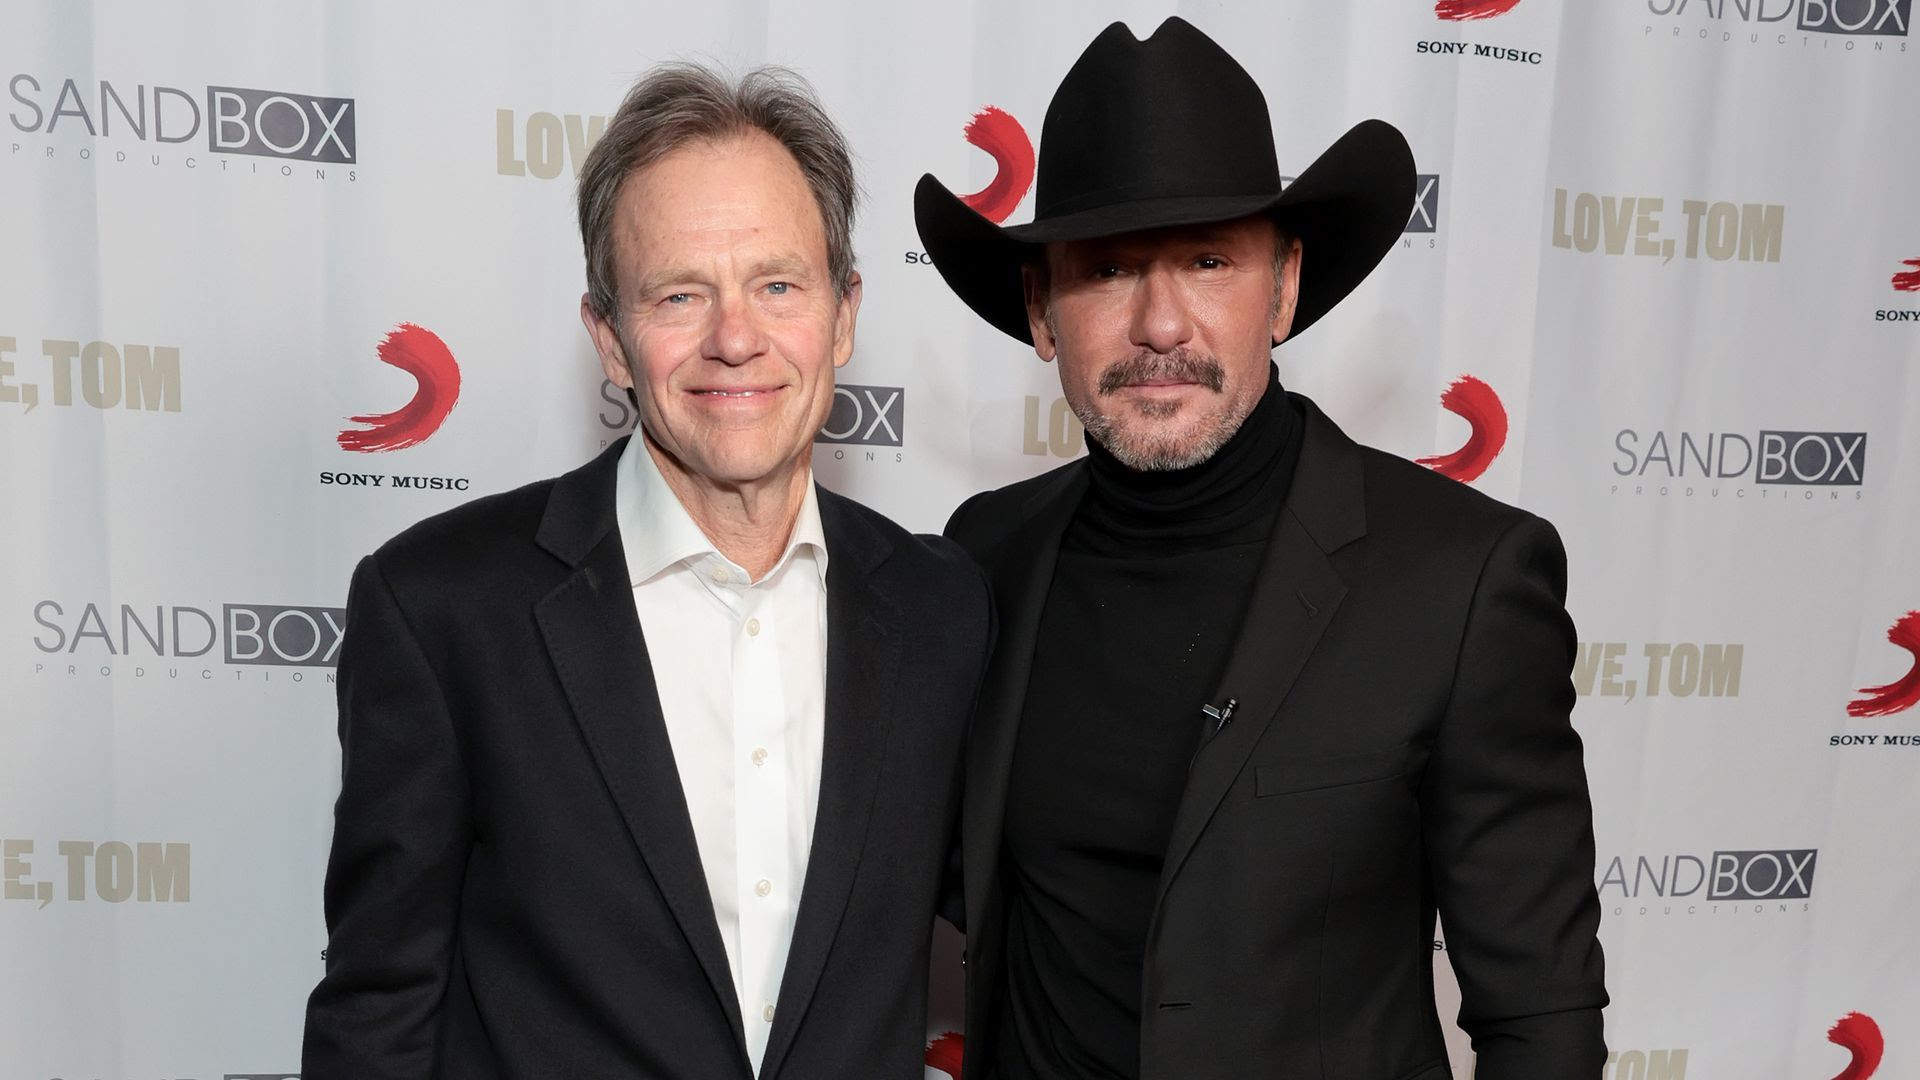 Tom Douglas and Tim McGraw attend an exclusive screening of "Love, Tom" at Regal Green Hills Cinema last month